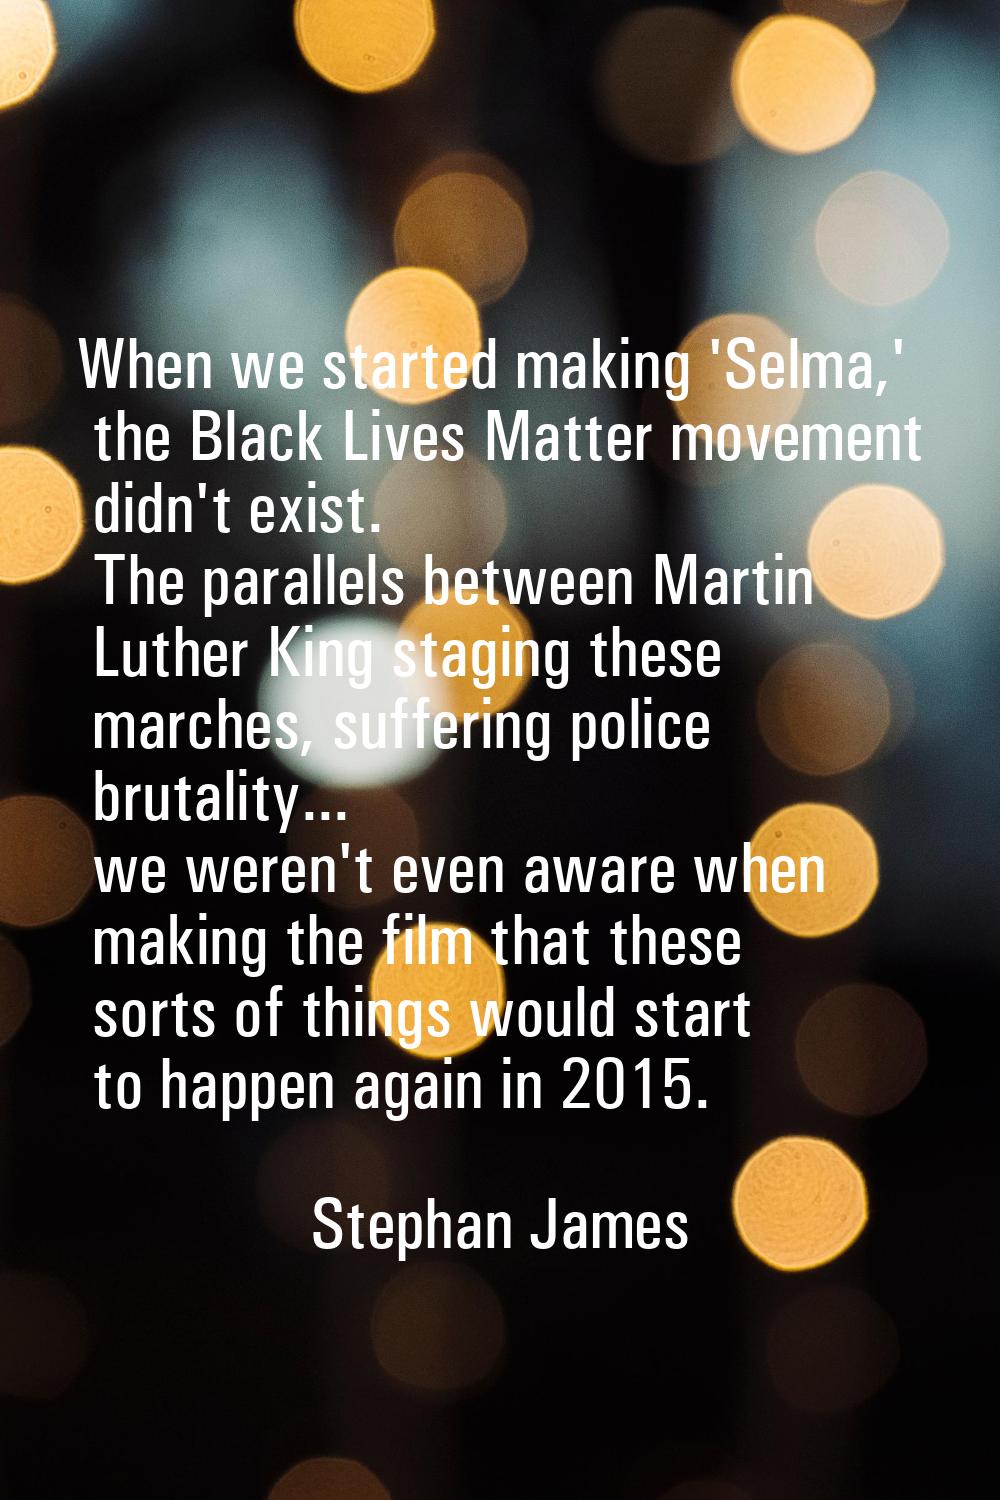 When we started making 'Selma,' the Black Lives Matter movement didn't exist. The parallels between